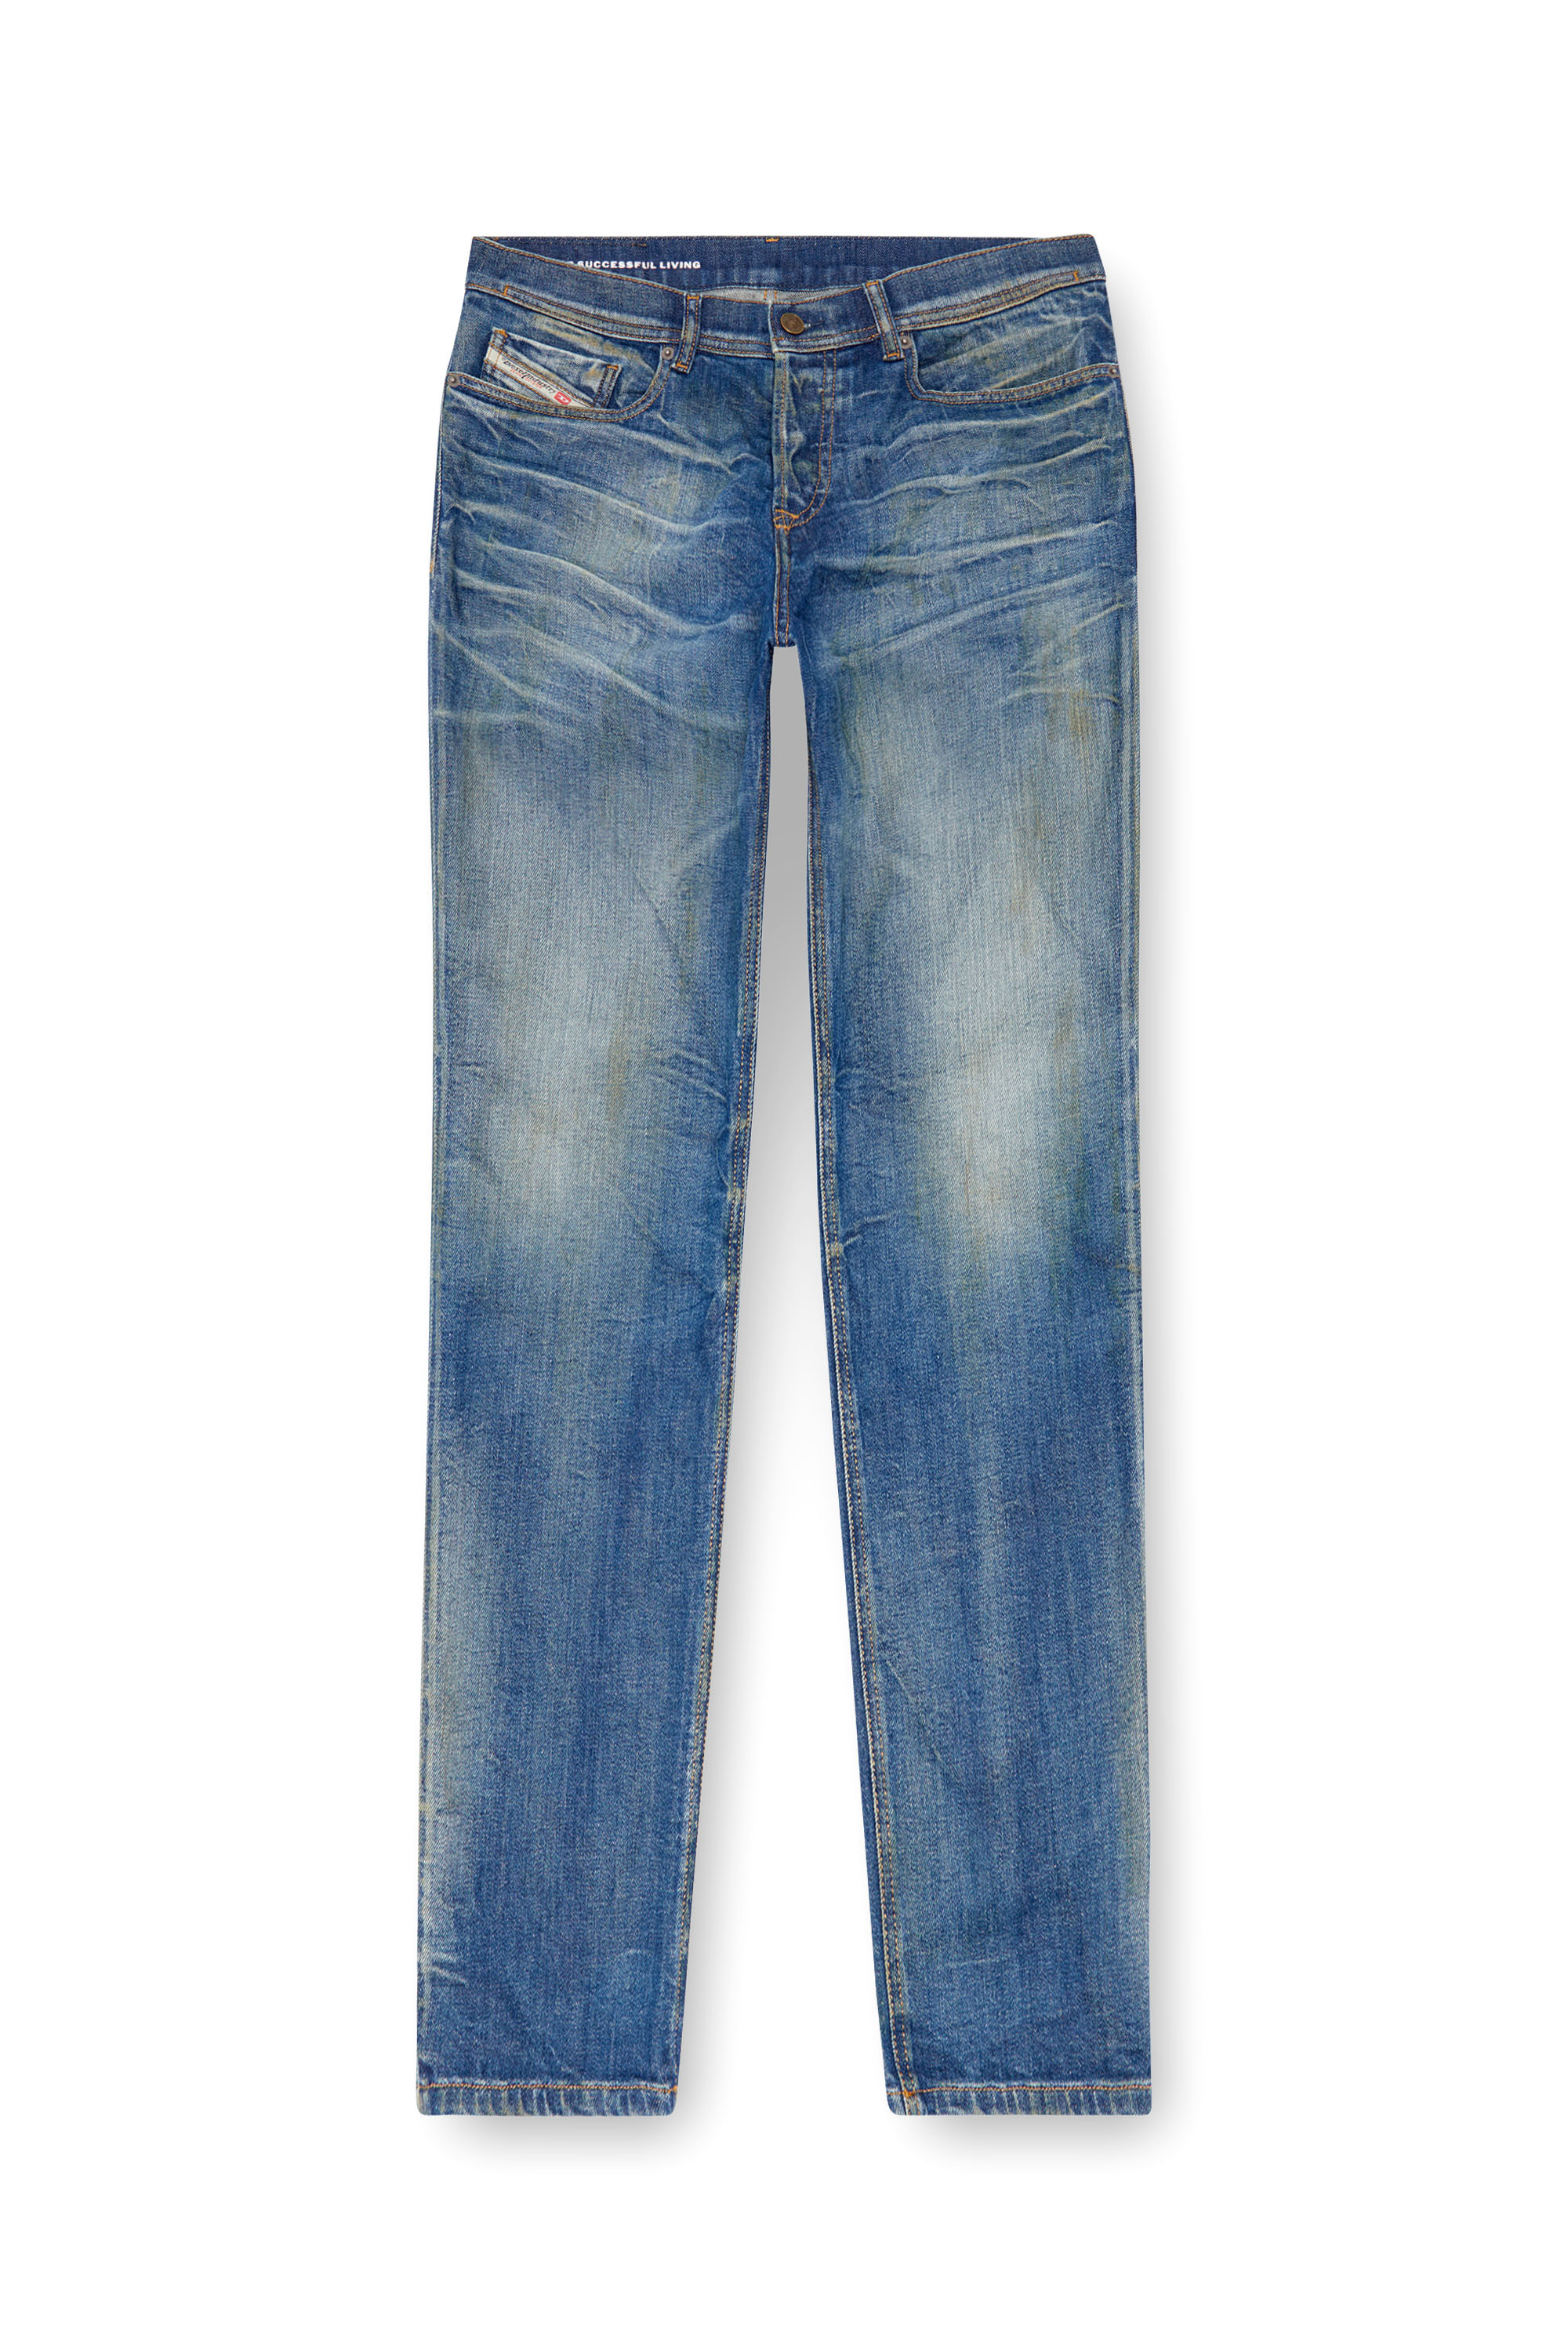 Diesel - Tapered Jeans 2023 D-Finitive 09J66, Hombre Tapered Jeans - 2023 D-Finitive in Azul marino - Image 3